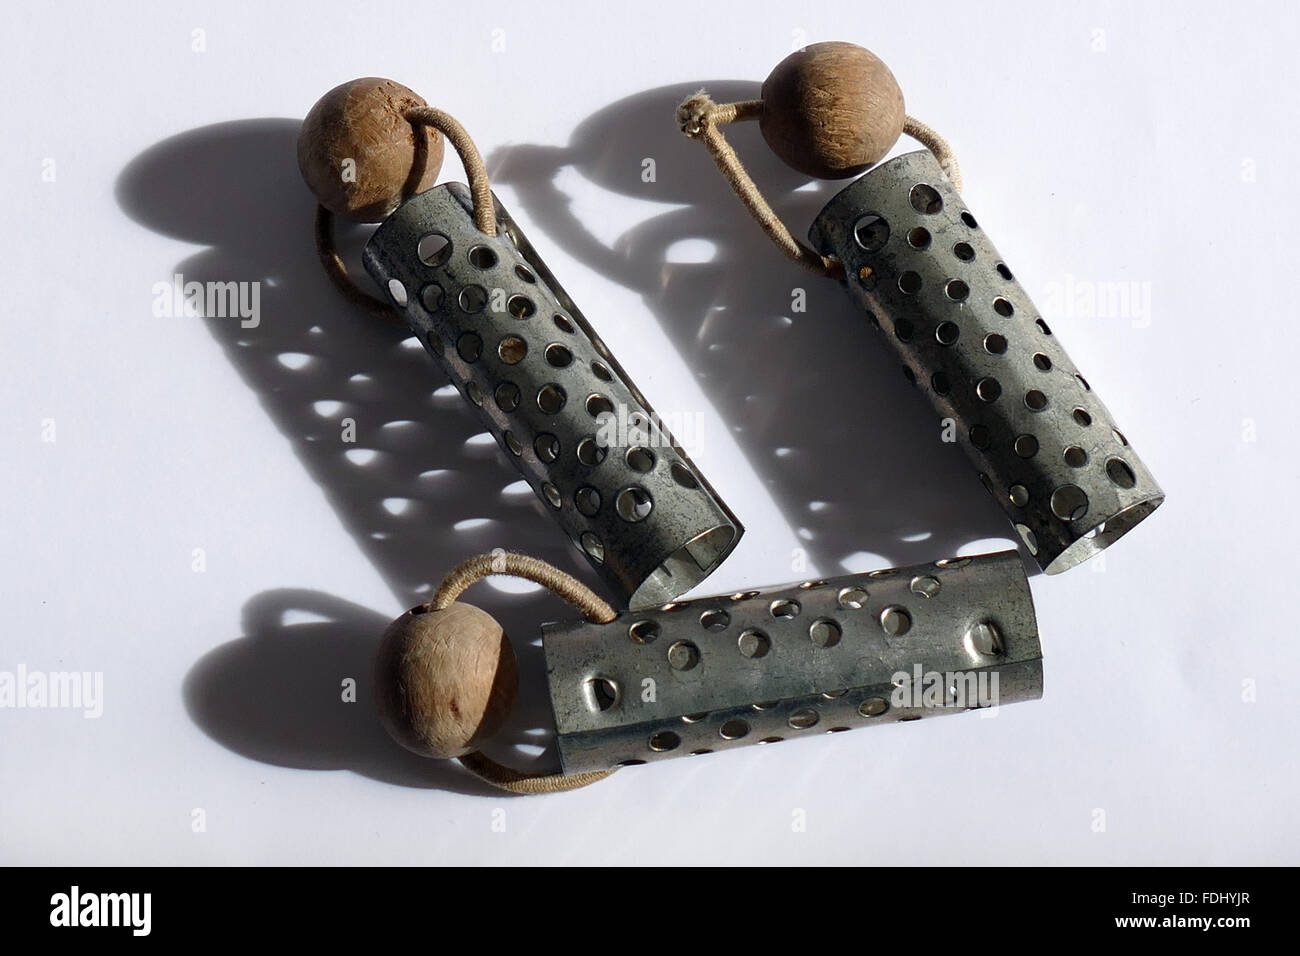 Old metal rollers for hair styling. Stock Photo